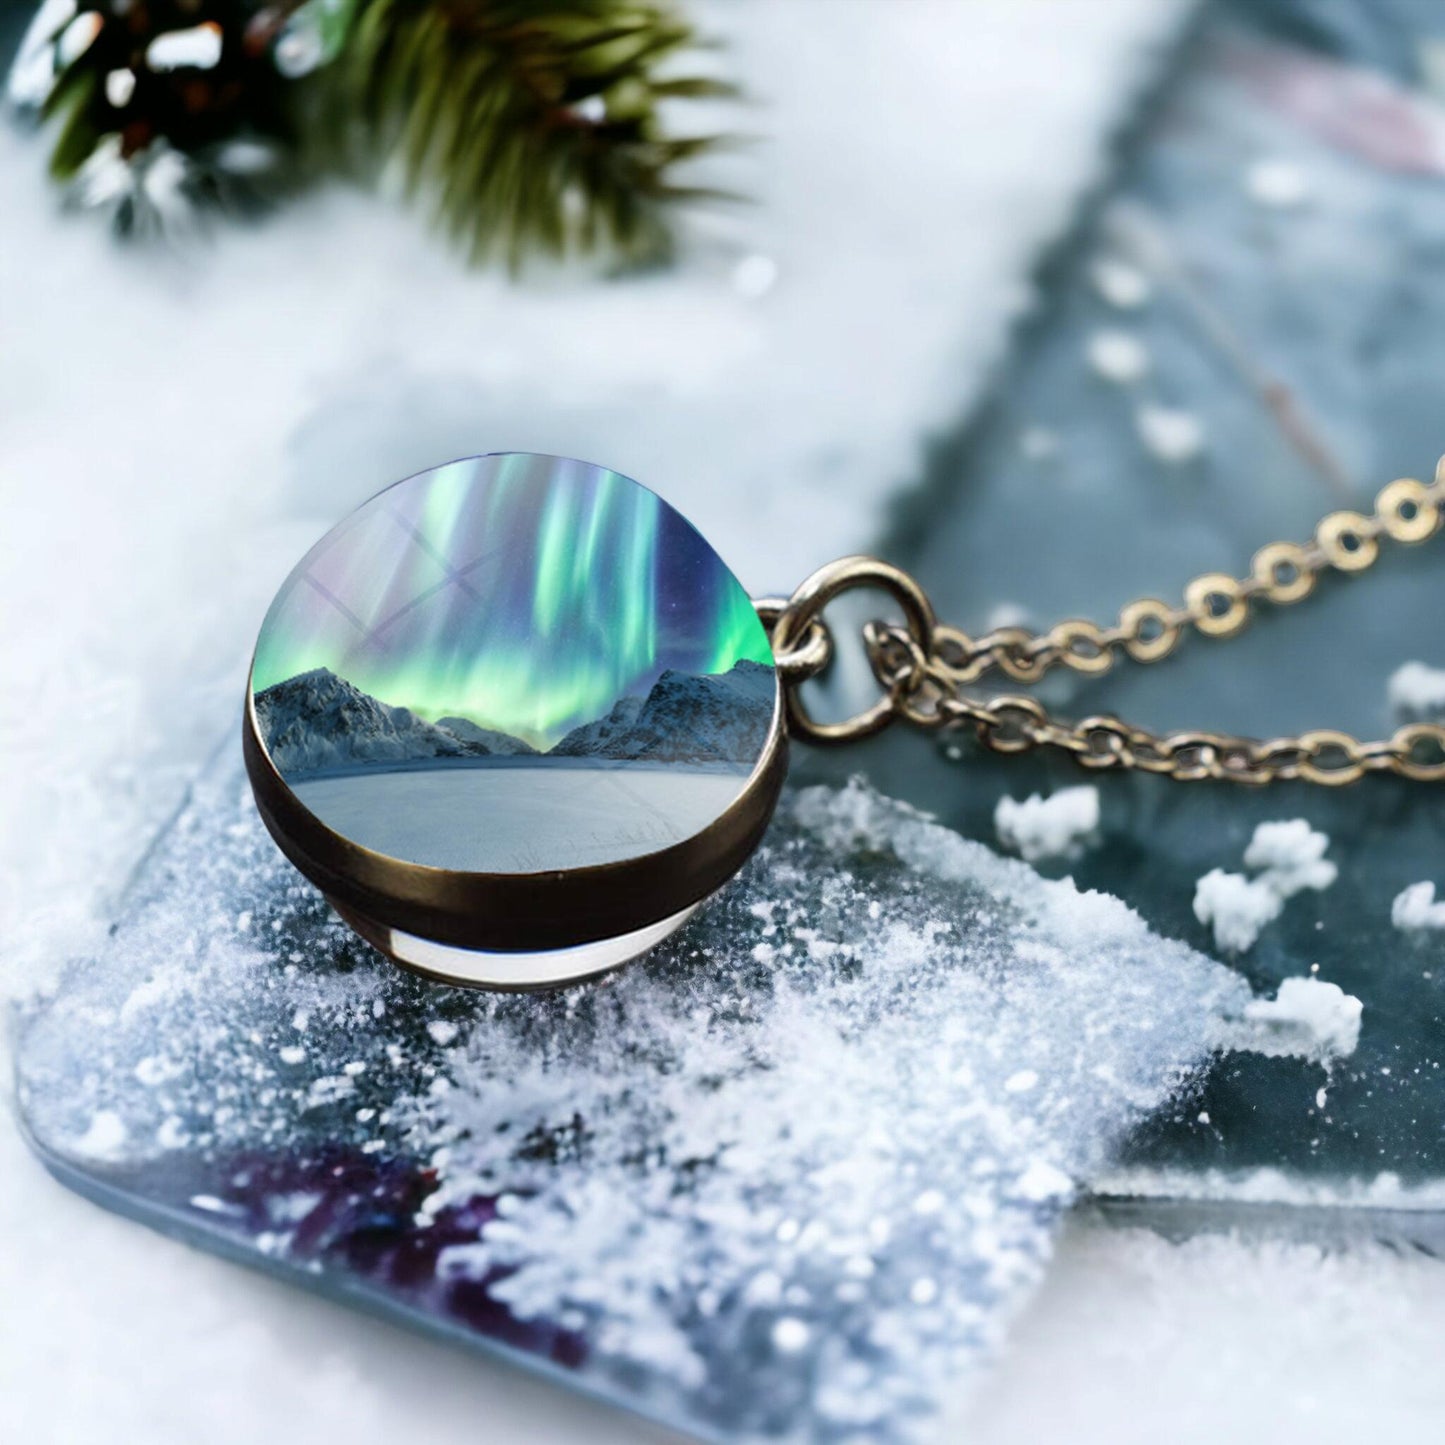 Unique Aurora Borealis Silver Necklace - Northern Light Jewelry - Double Side Glass Ball Pendent Necklace - Perfect Aurora Lovers Gift 13